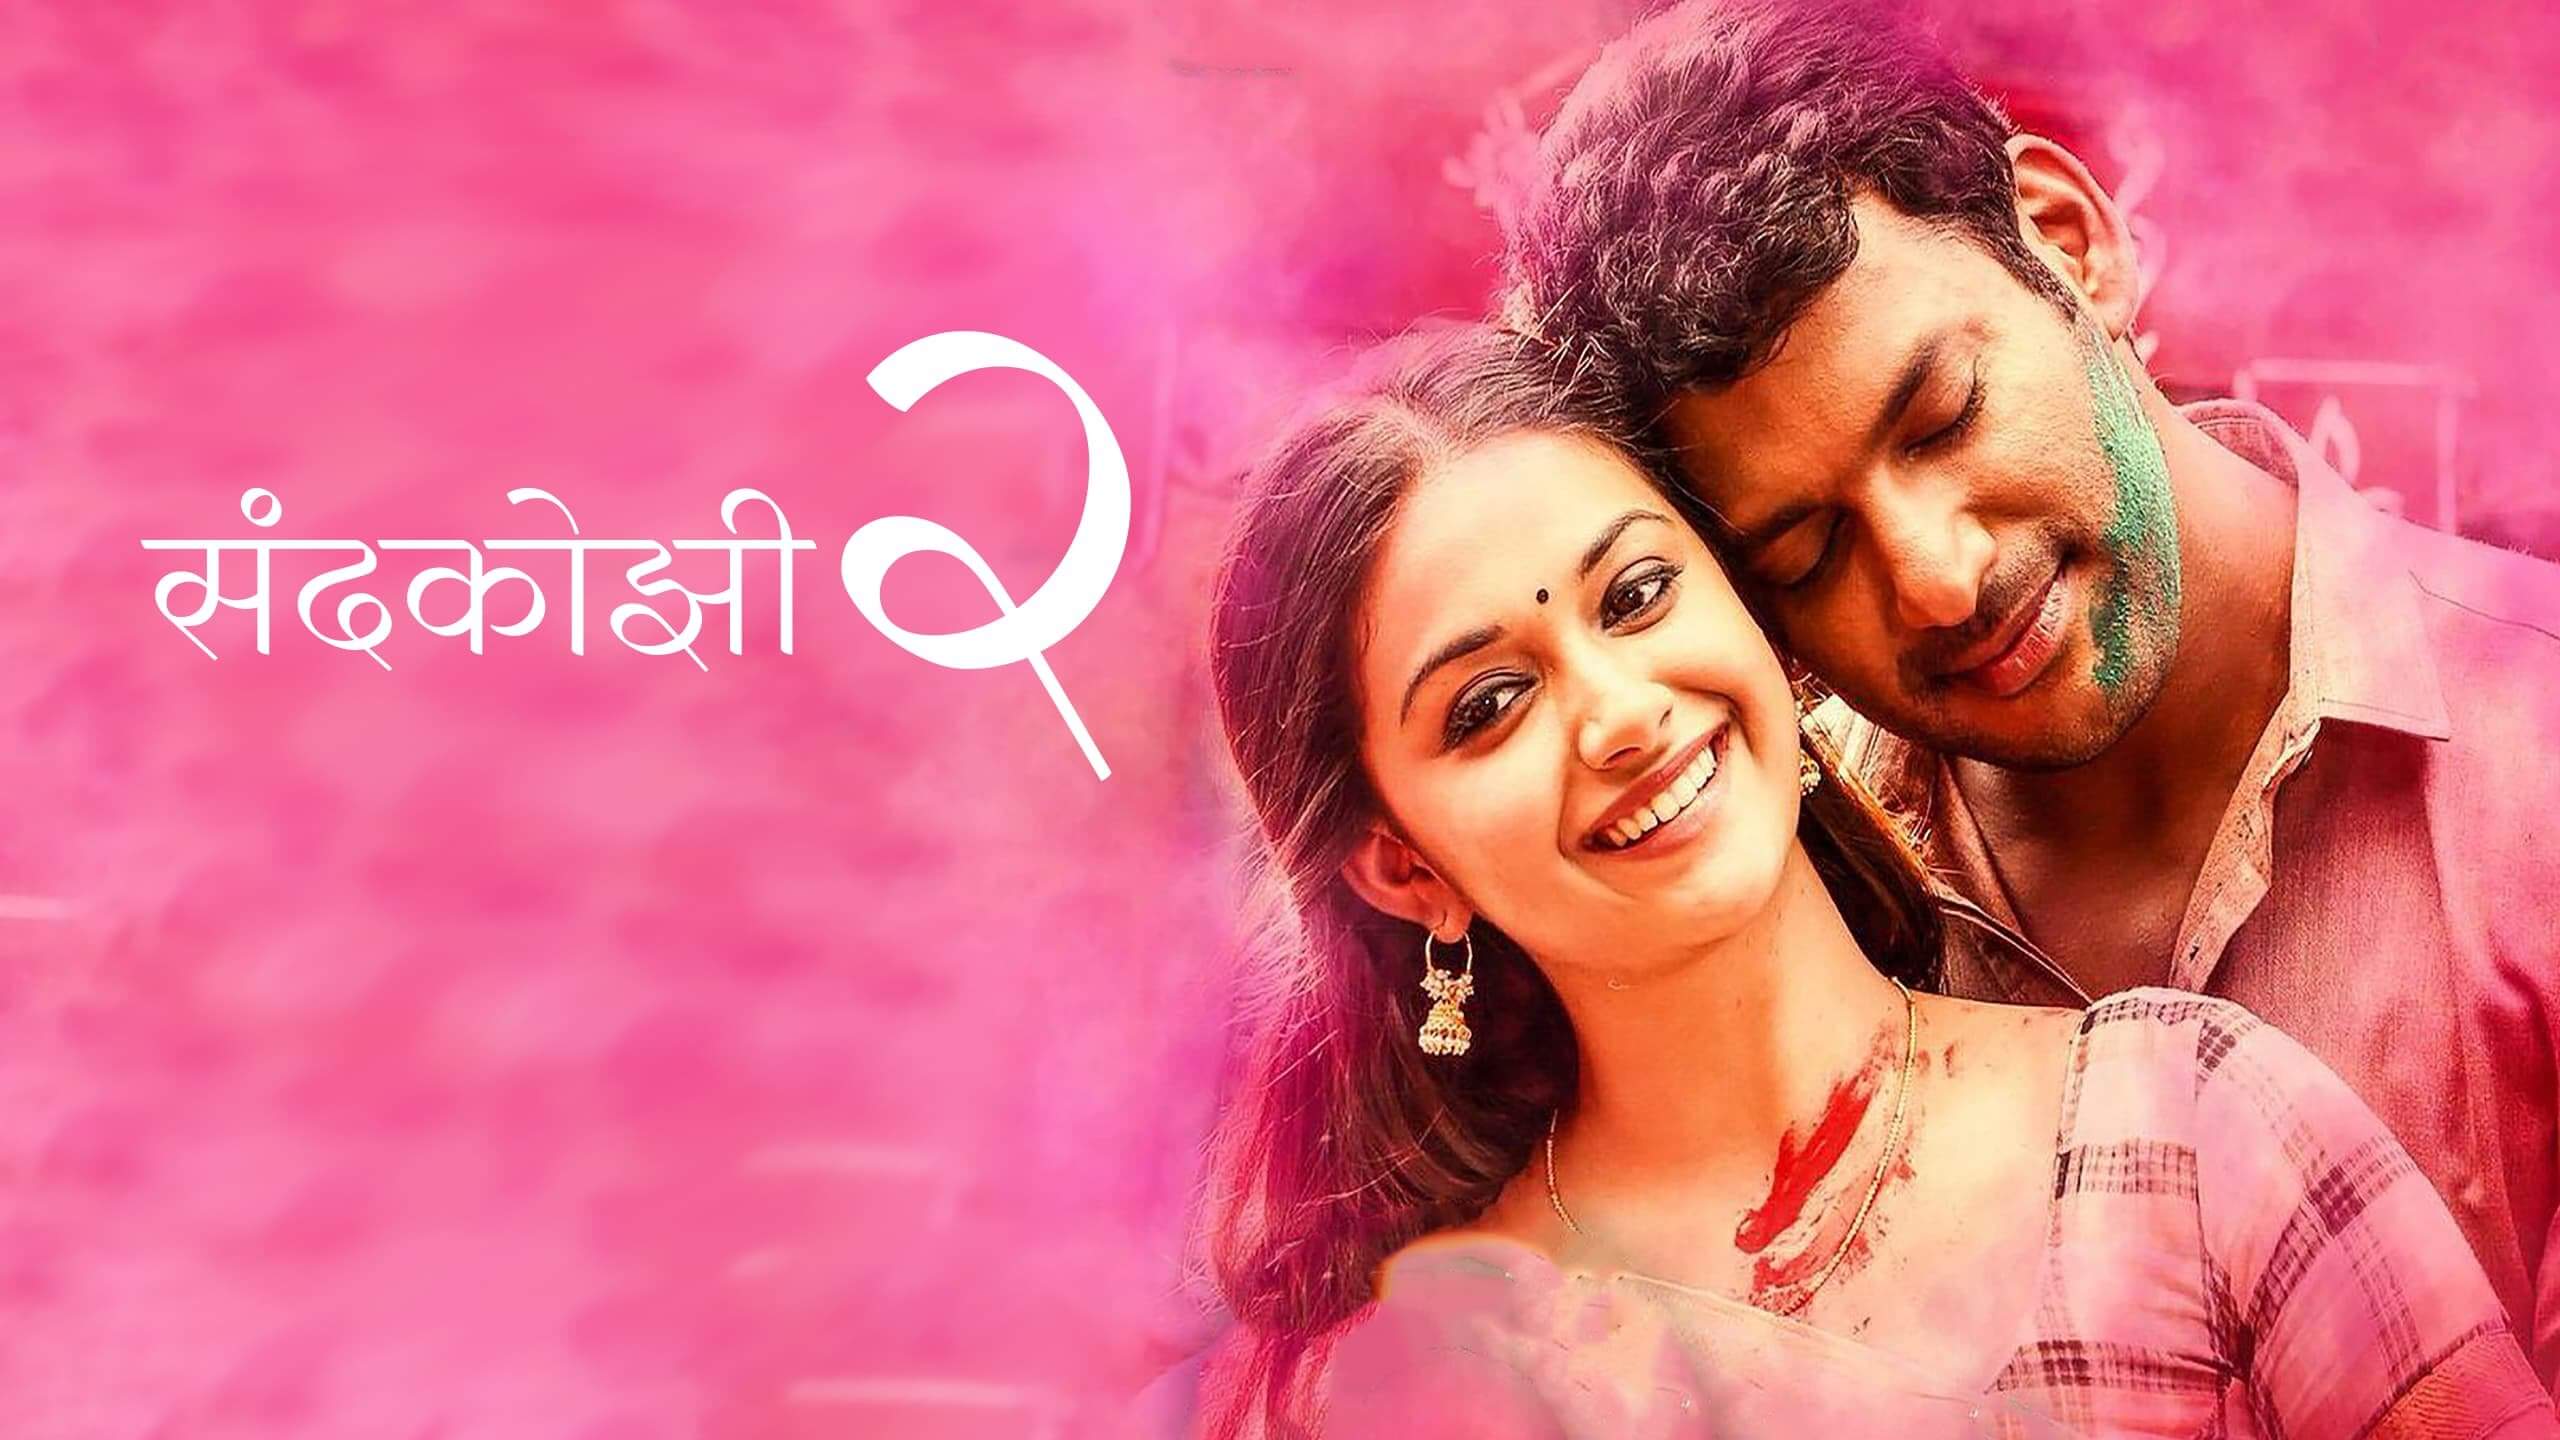 After Vada Chennai, Sandakozhi 2 leaked online hours after theatrical  release on same website – Firstpost